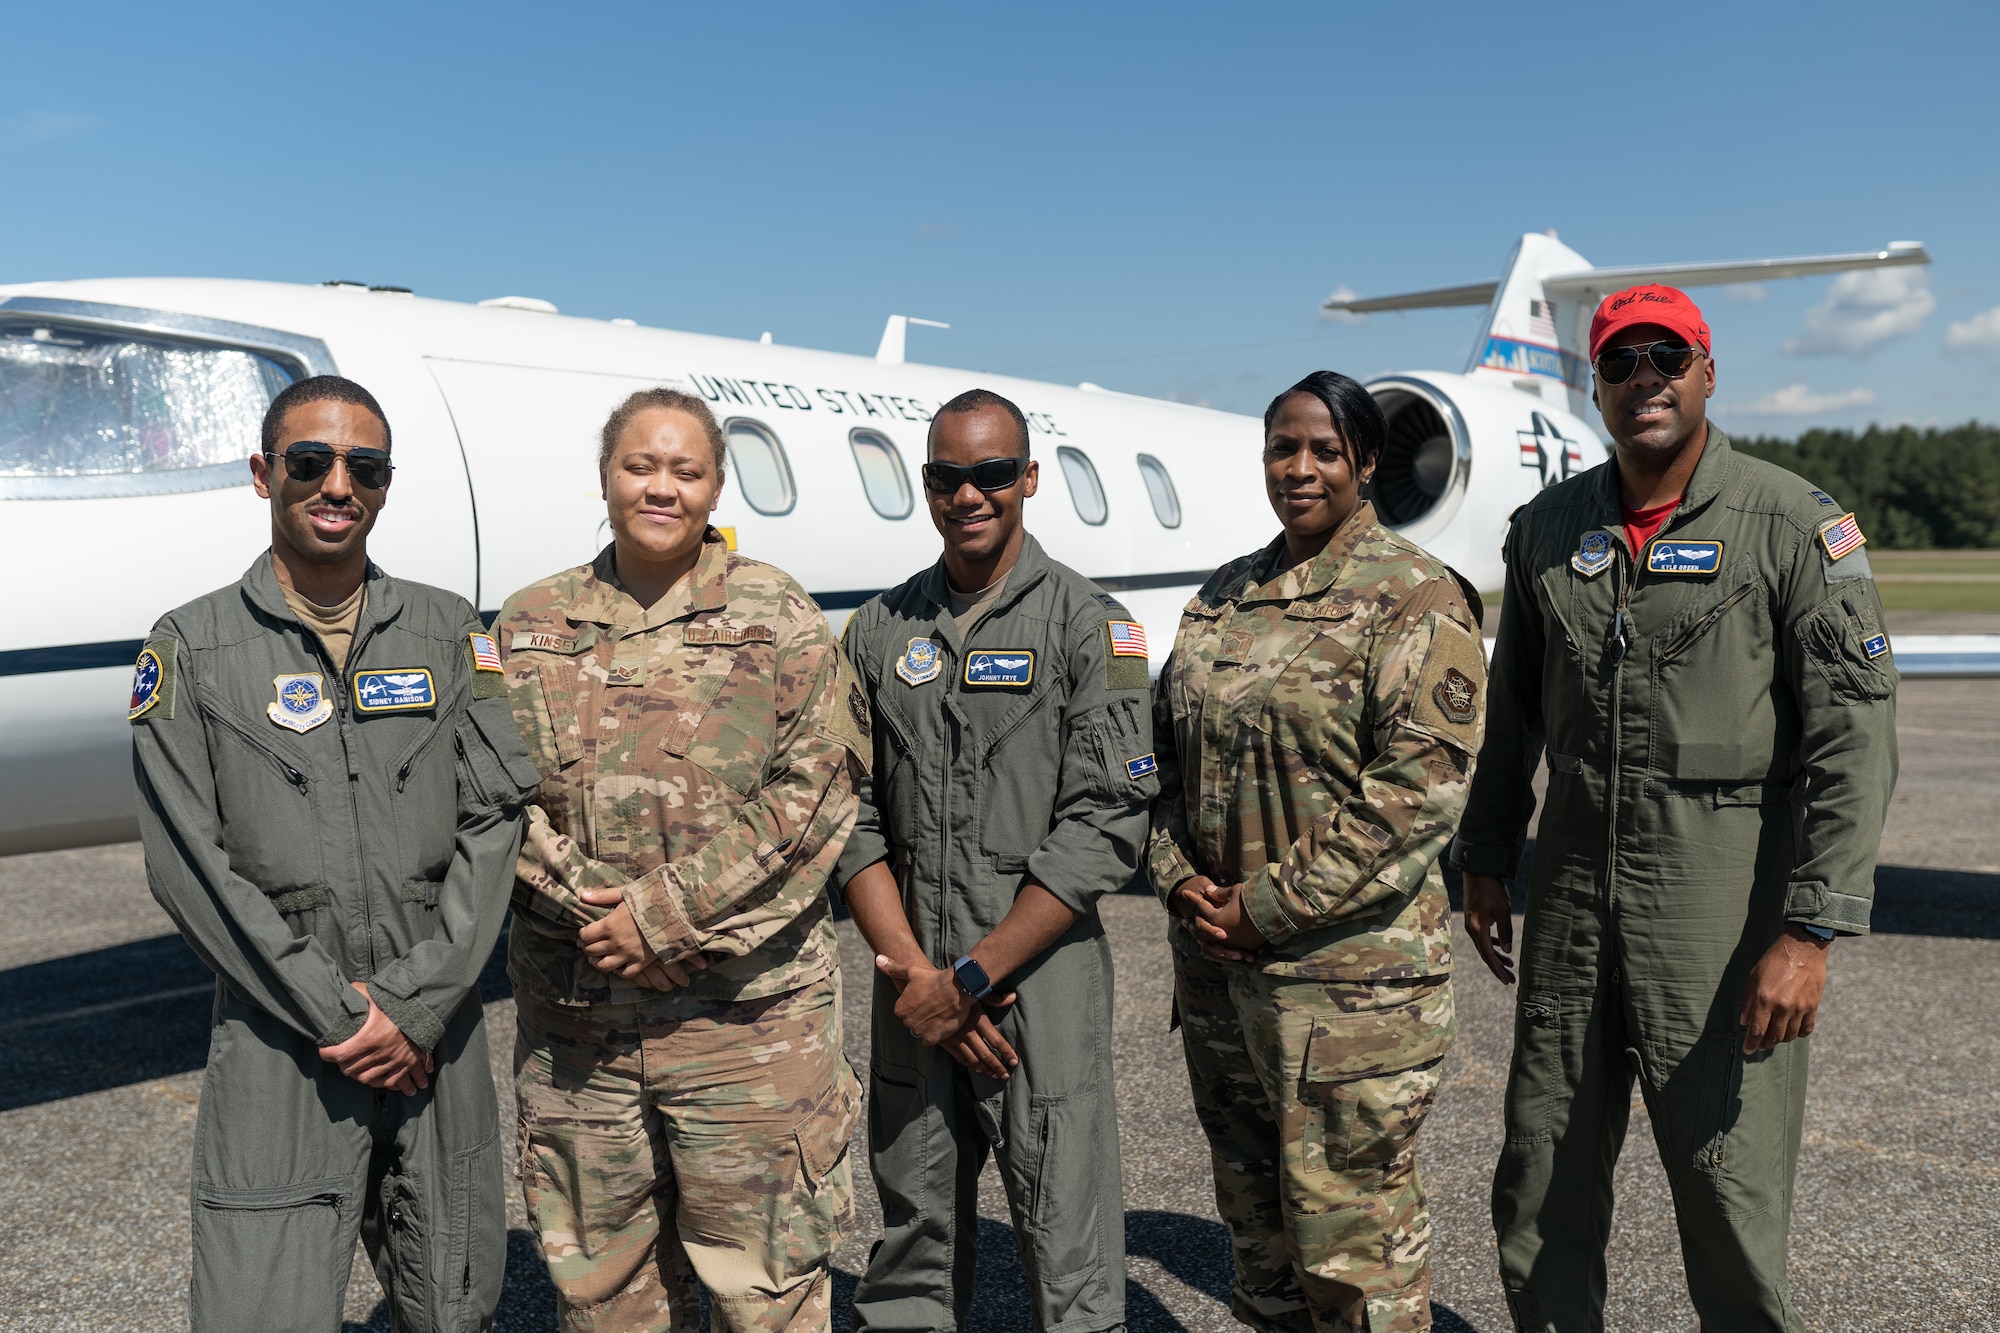 U.S. Air Force Capt. Sidney Ganison, C-21 pilot, stands next to Staff Sgt. Rachel Kinsey, Aviation Resource Management NCOIC, Capt. Johnny Frye, C-21 pilot, Master Sgt. Shina Williamson, 458th Airlift Squadron superintendent, and Capt. Kyle Green, C-21 pilot, (left to right) during a trip to Tuskegee, Alabama, Sept. 28, 2021. The group made history as being the first all-African American crew to land the C-21 at Alabama's historic Tuskegee Airfield. (U.S. Air Force photo by 1st Lt. Sam Eckholm)